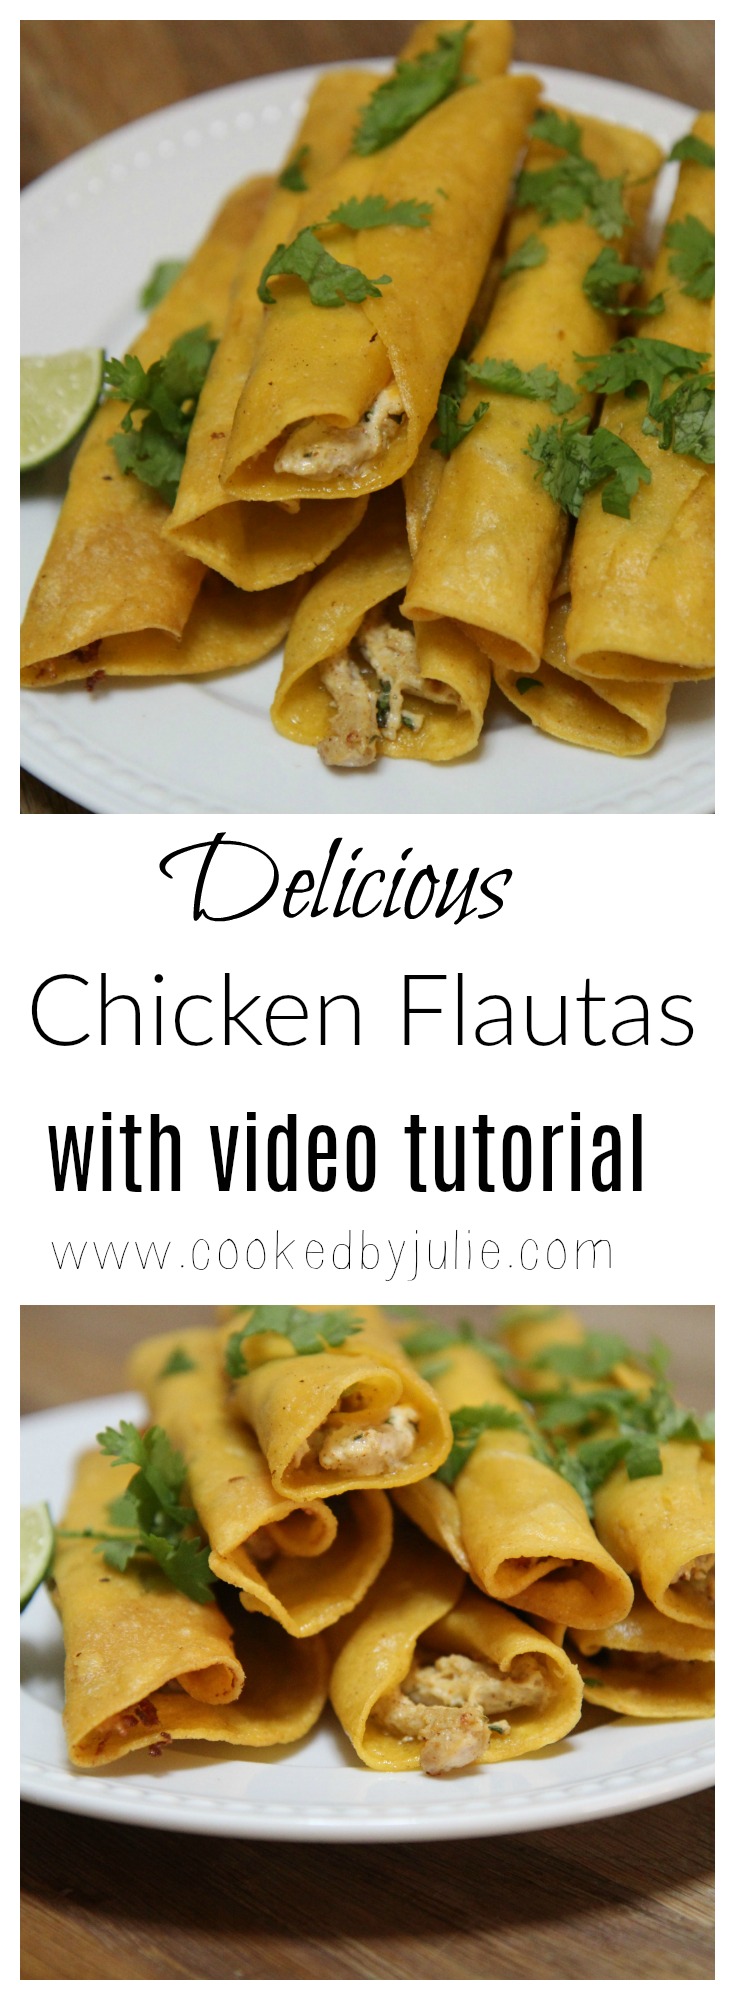 Delicious and Easy Chicken Flautas Recipe | Video from Cooked By Julie